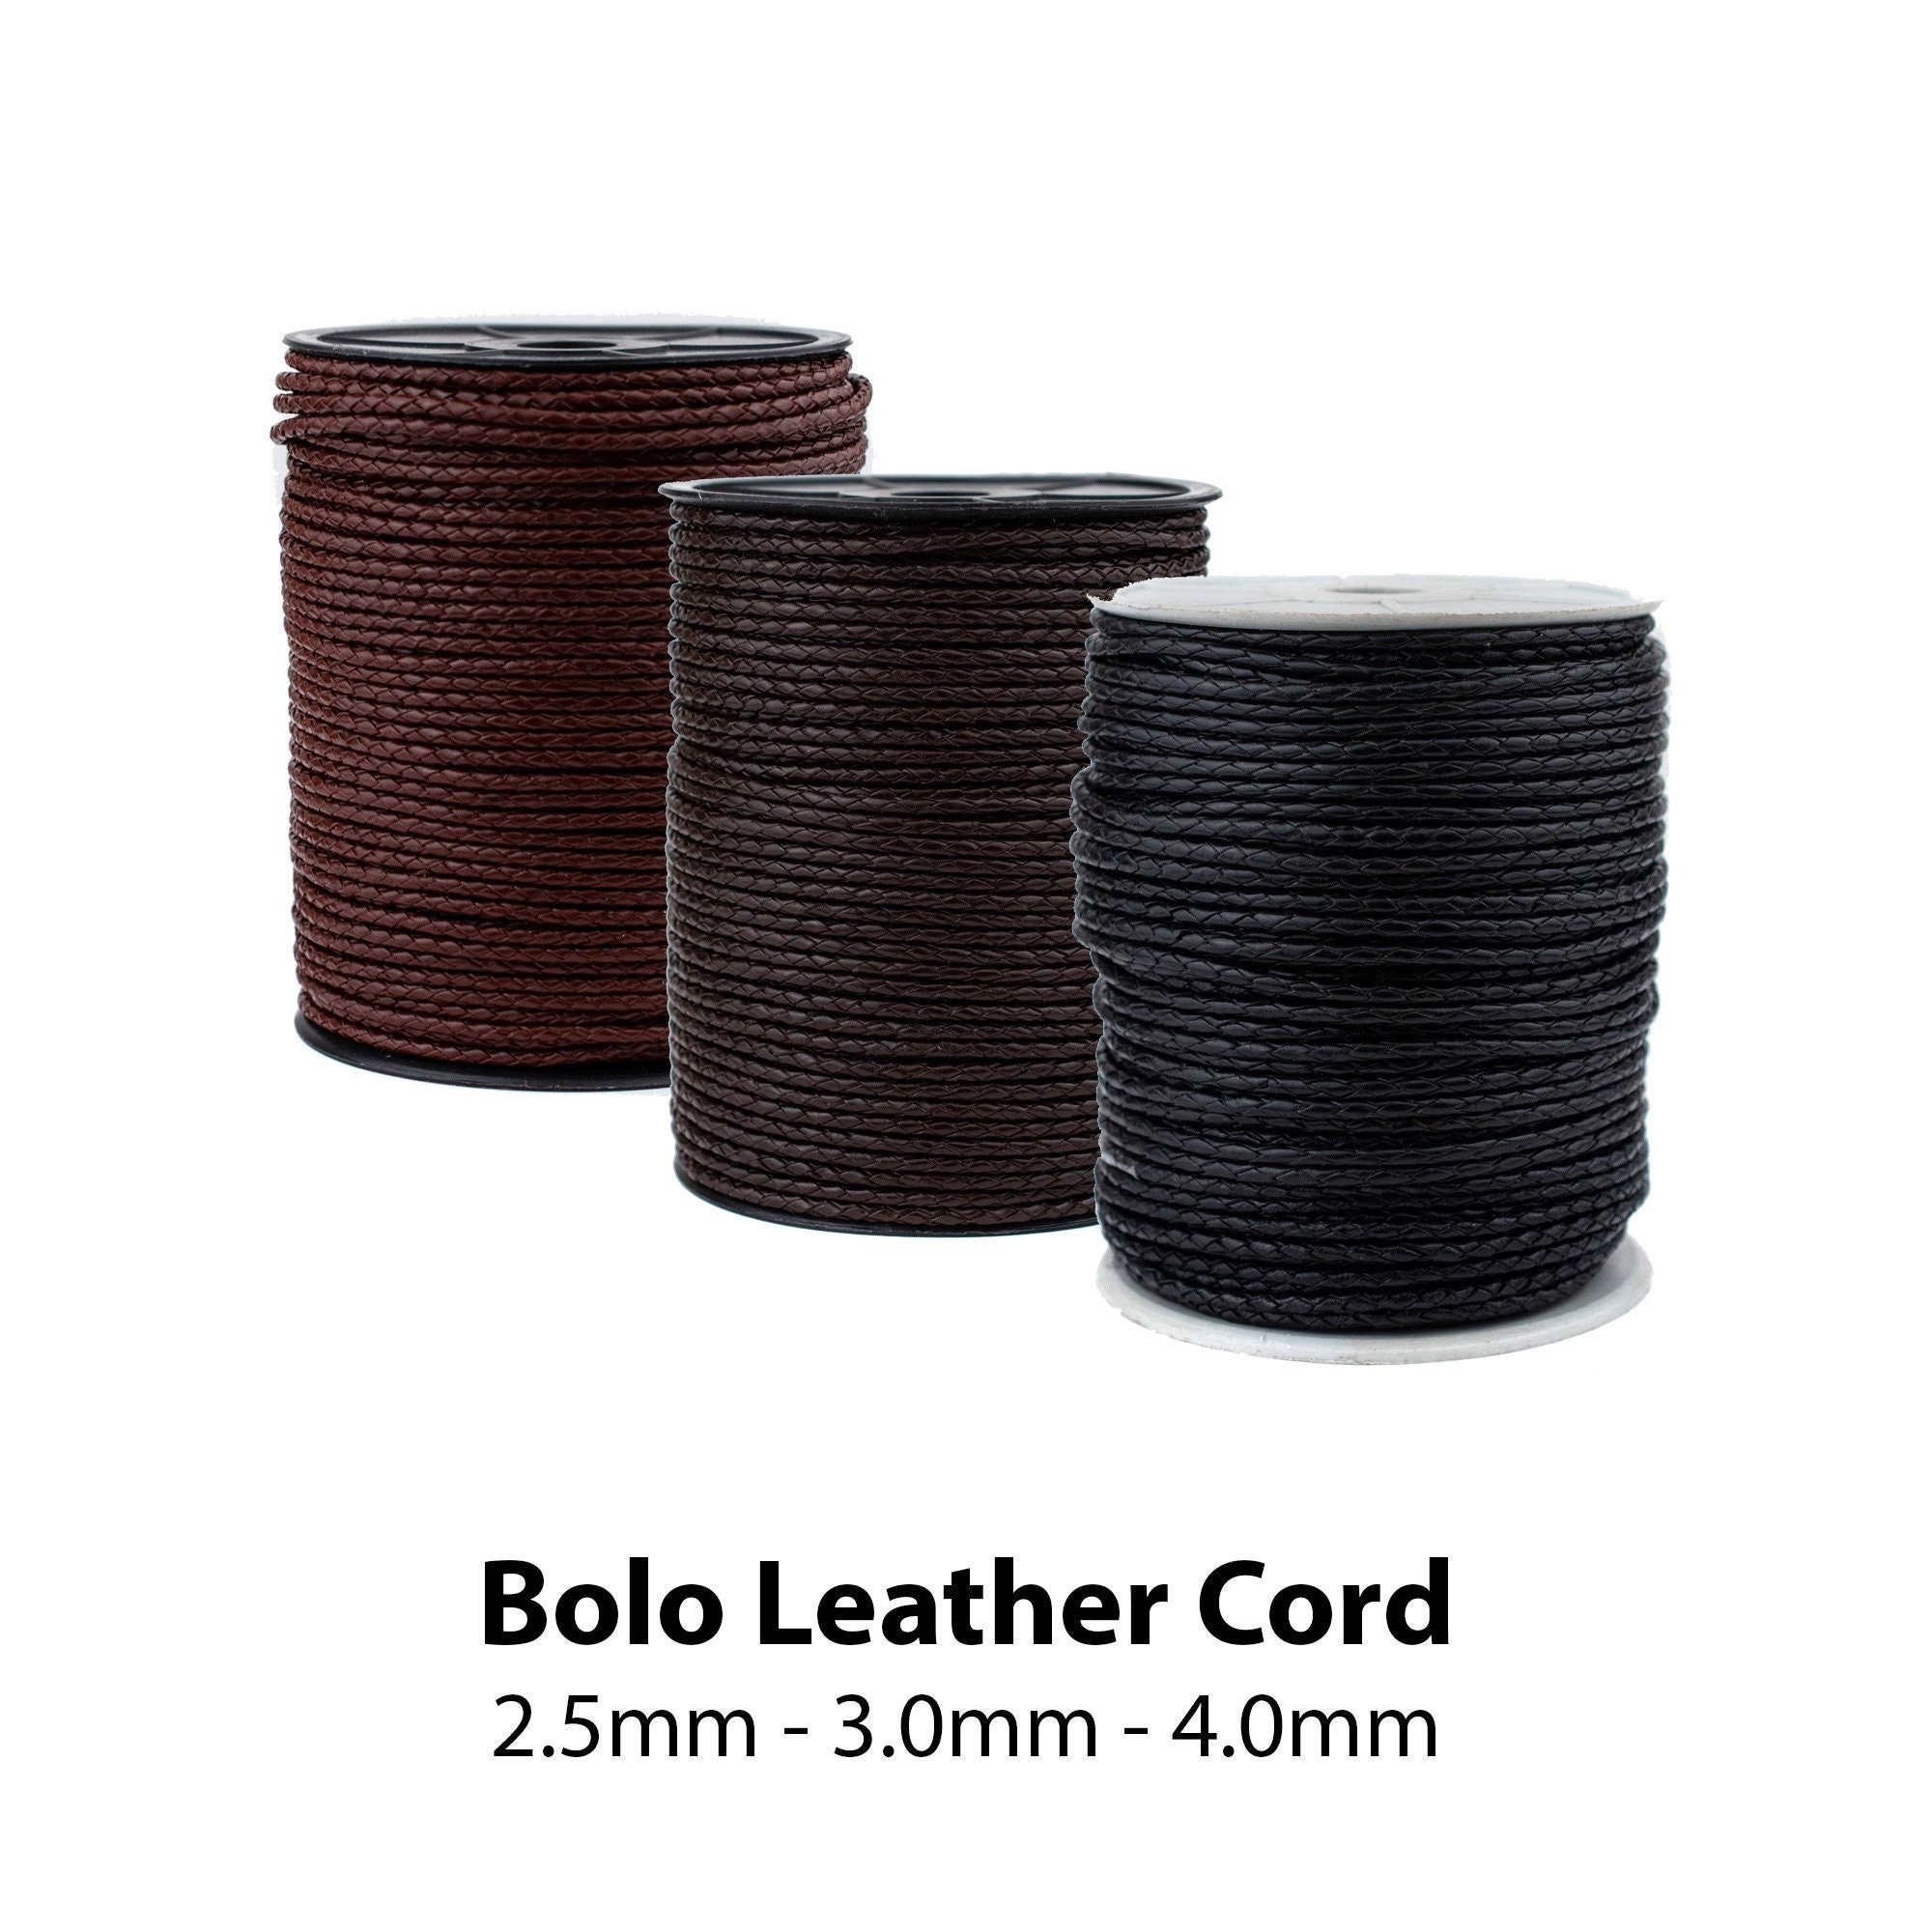 Mandala Crafts 6mm Bolo Cord Bolo Braided Leather Cord for Jewelry Making  Round Genuine Leather Cord Bolo Tie Cord for Crafts Wrapping Bolo Ties Red  2.2 Yards Red 6mm 2.2 Yards